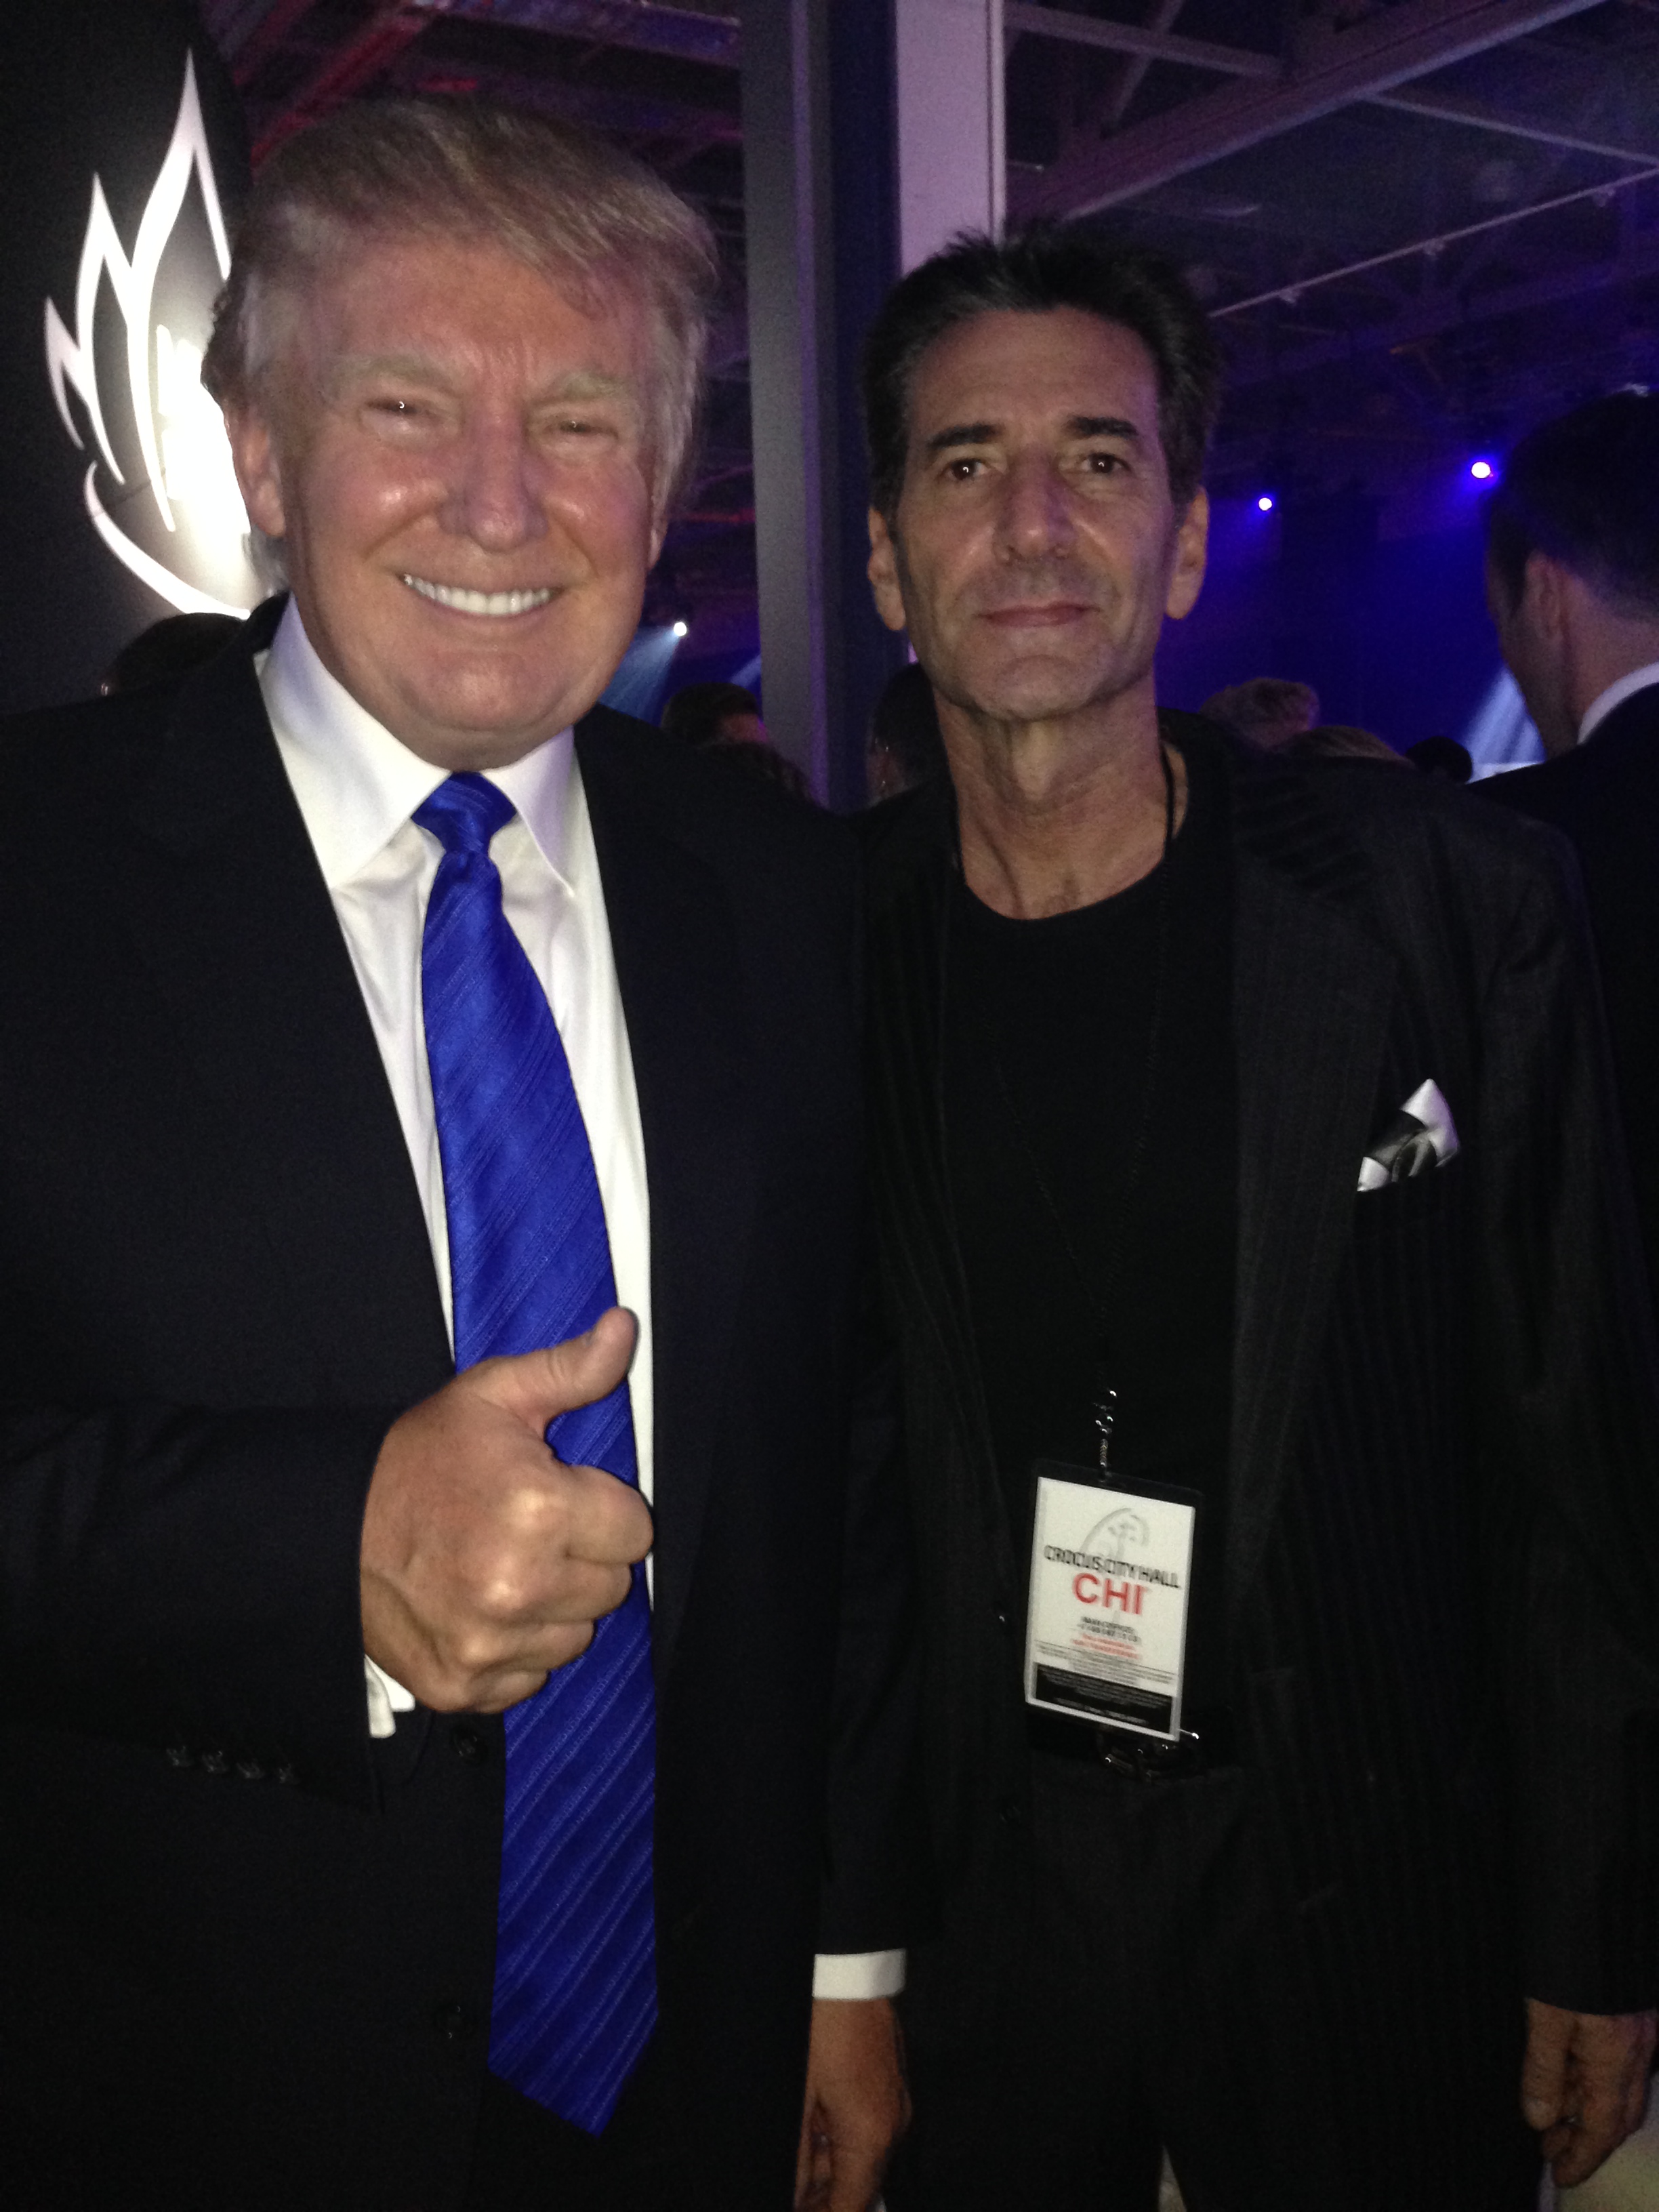 Bob Vn Ronkel and Donald Trump in Moscow at Miss Universe 2013